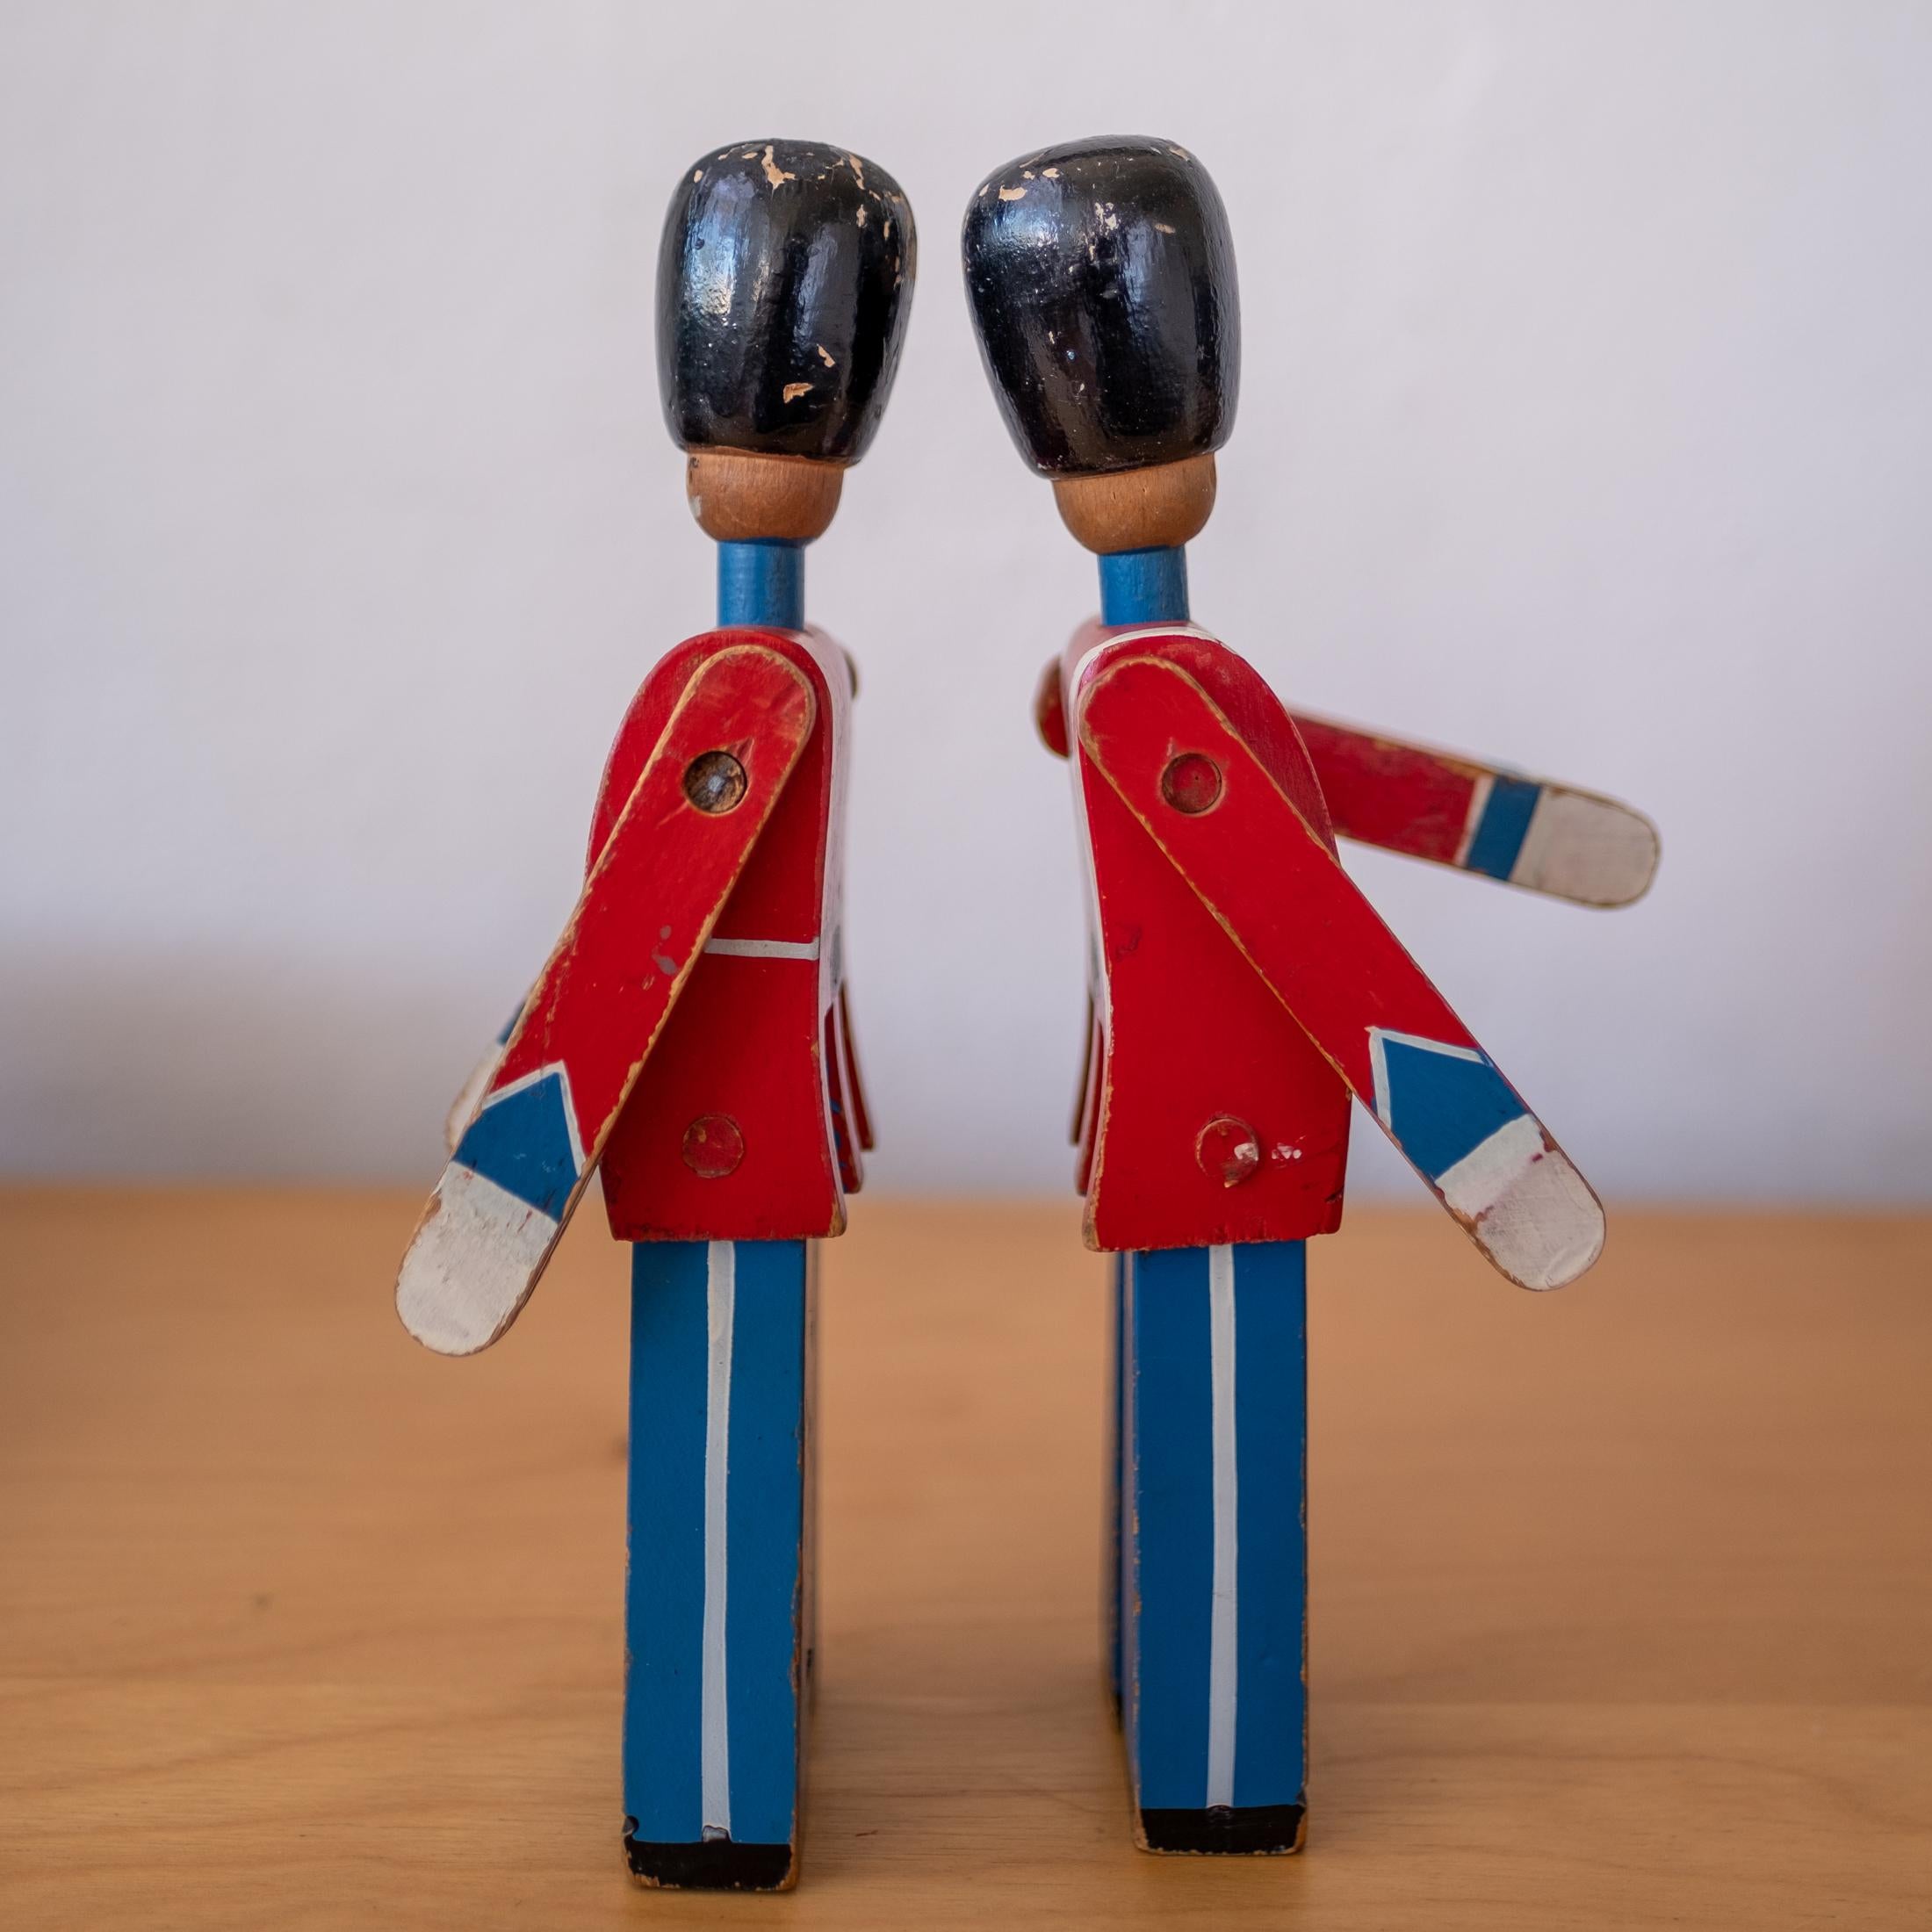 Danish Wooden Toy Soldiers by Kay Bojesen